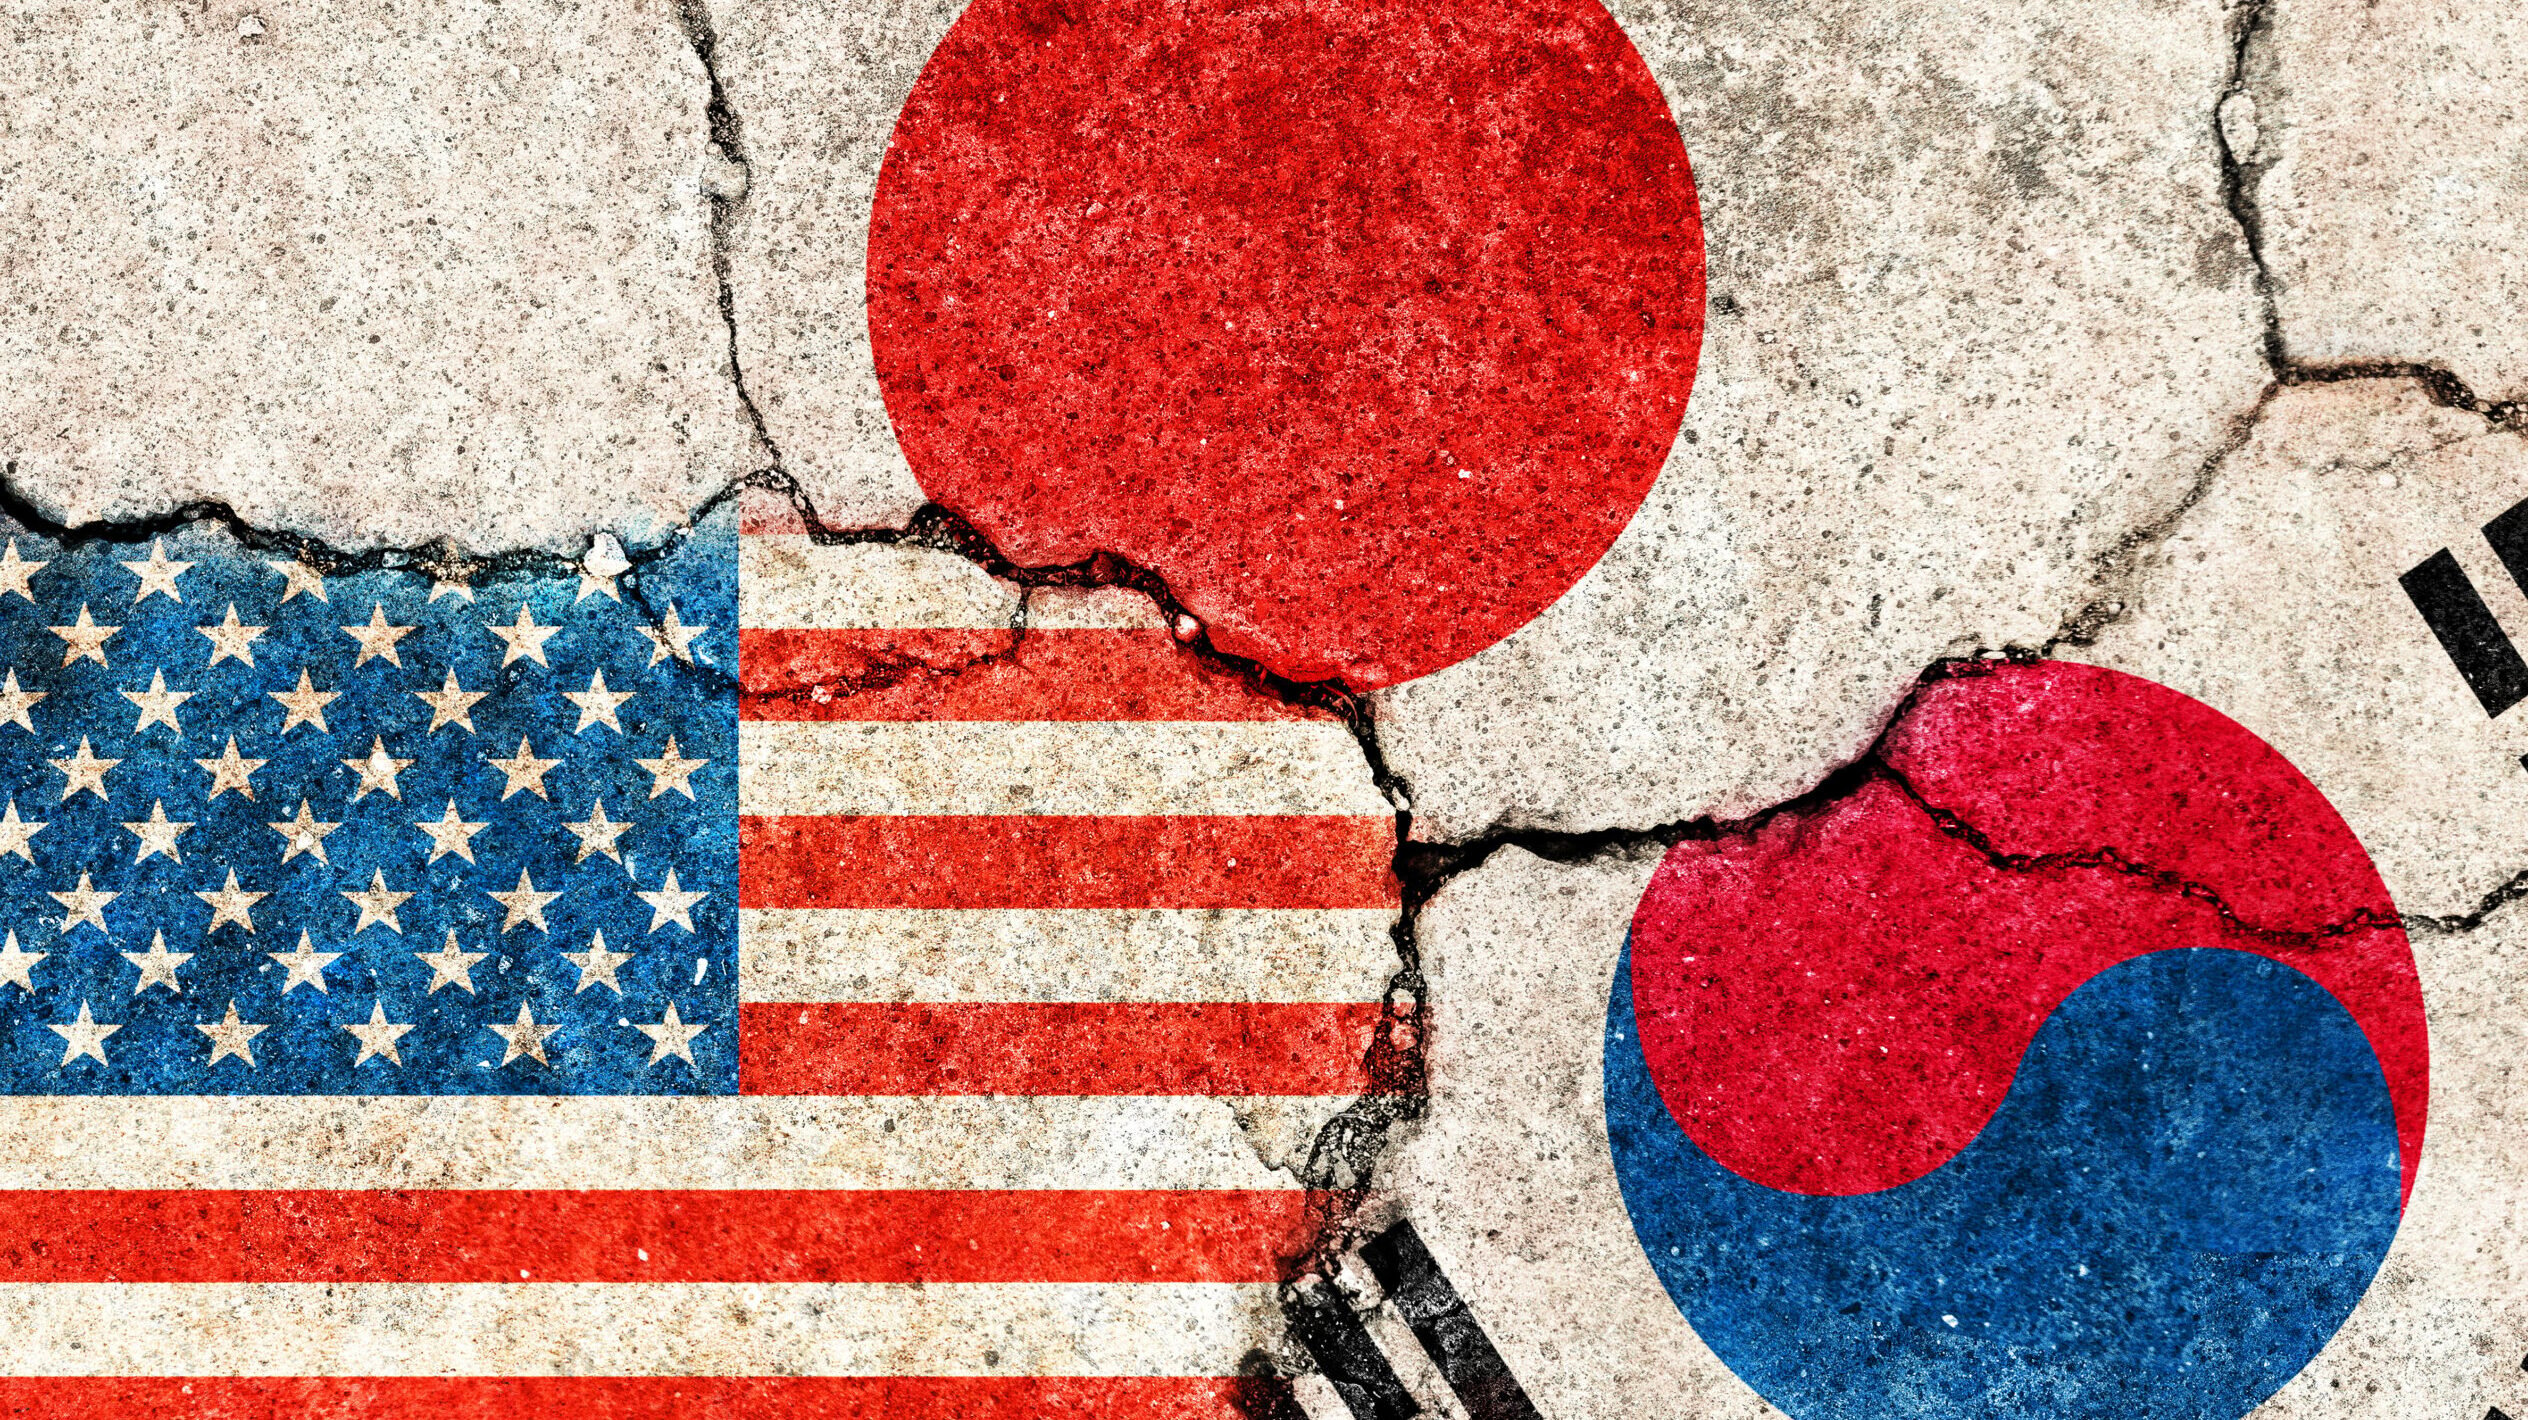 US-Japan-ROK to make ‘pledge’ to consult each other in security crises